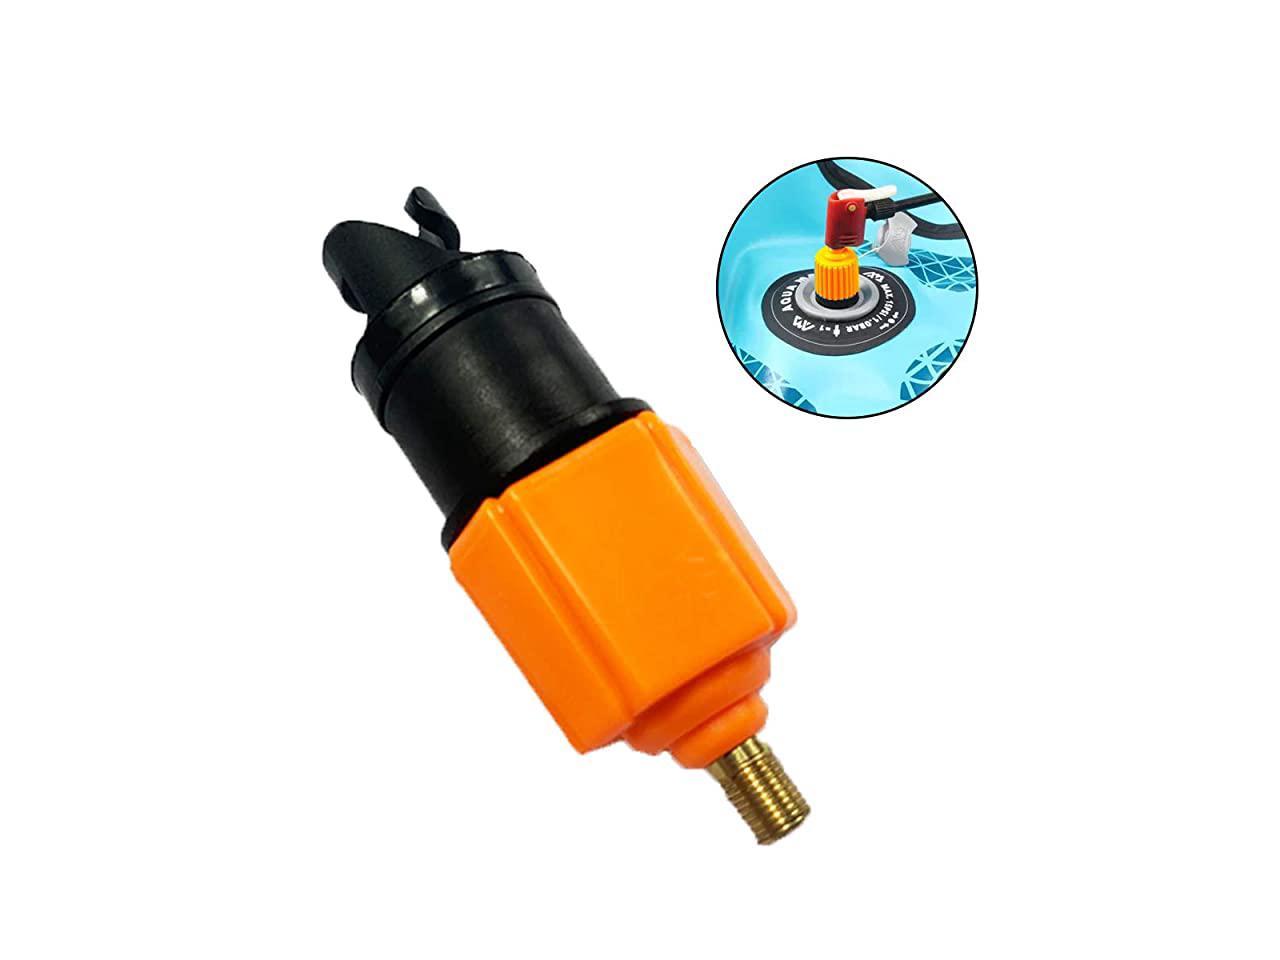 Inflatable SUPs Pump Adaptor Compressor Air Valve Converter for Inflatable Boat, 